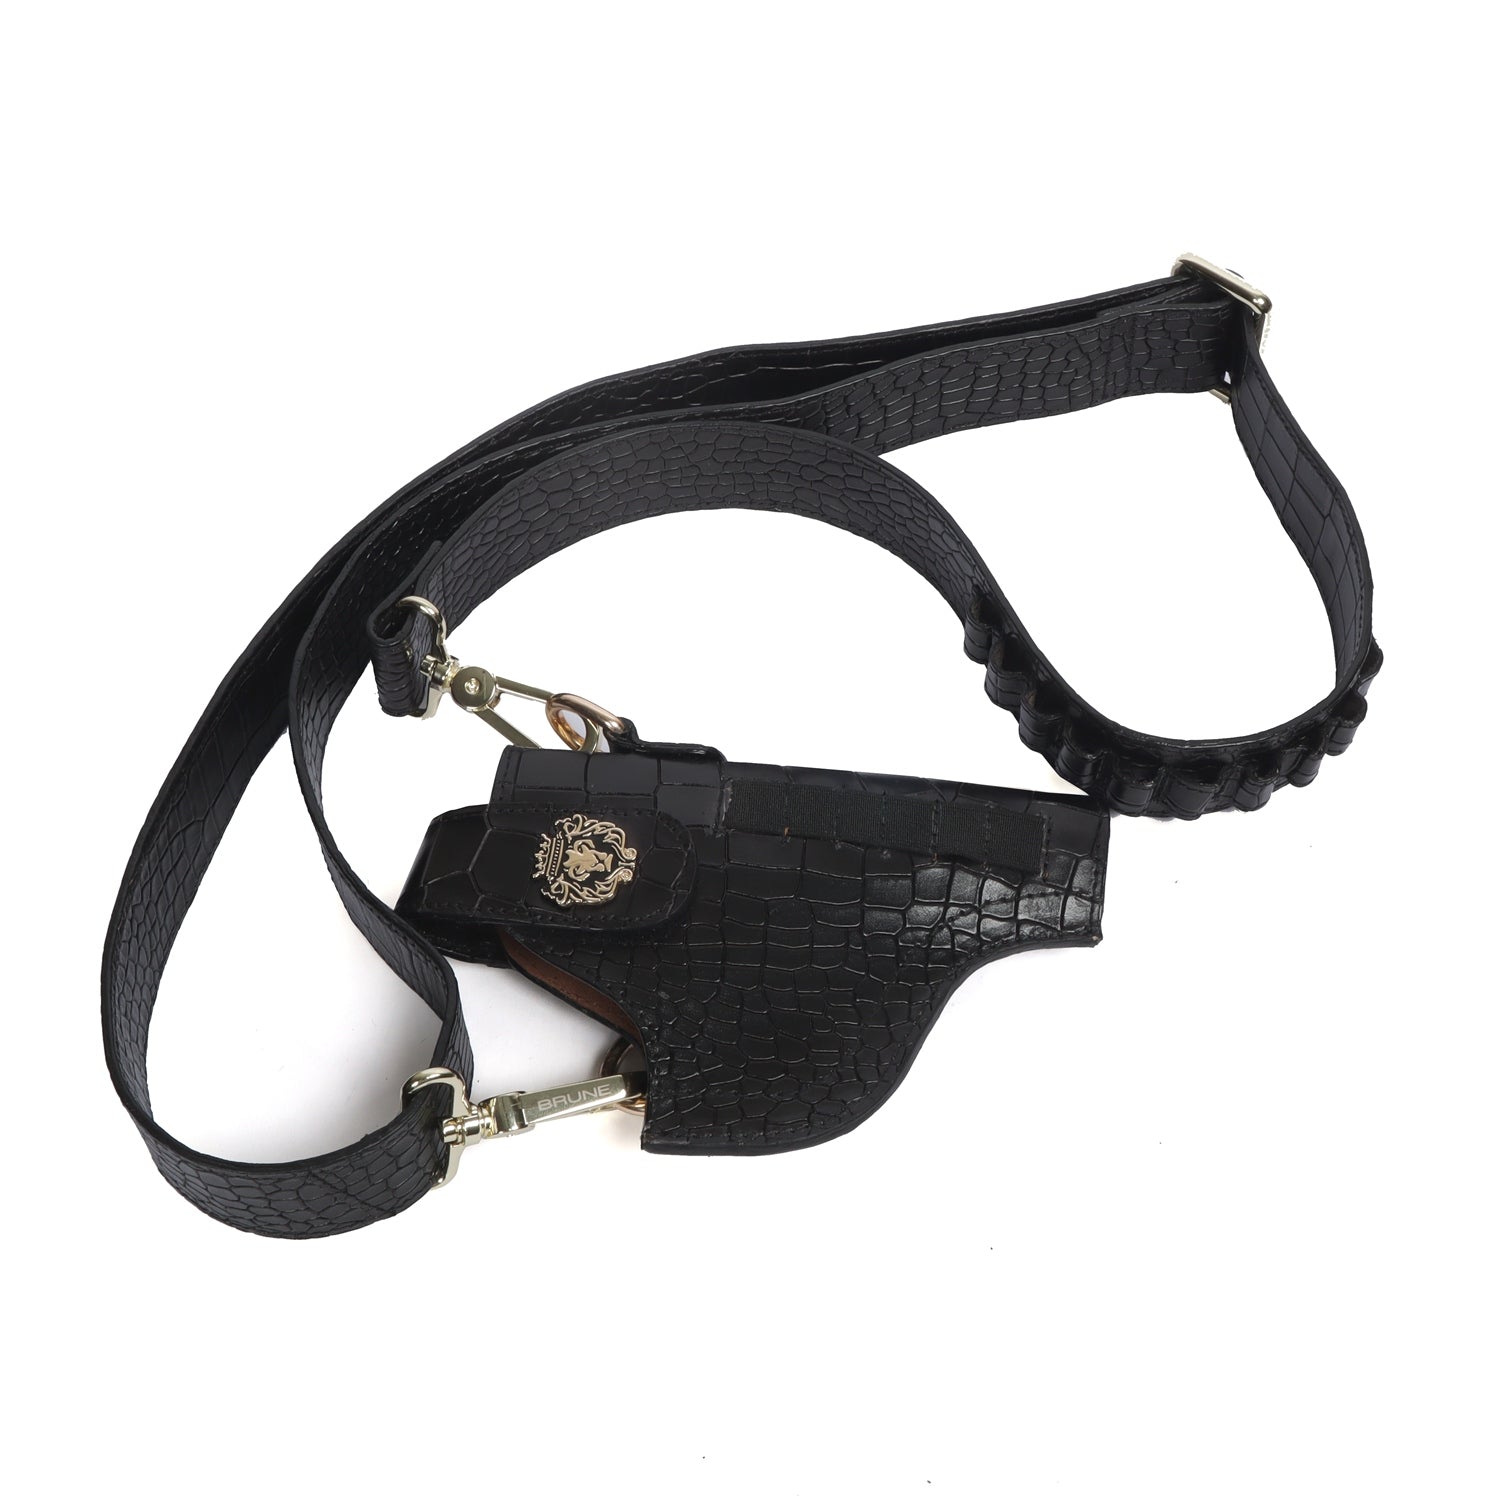 Adjustable Strap .32 Revolver Cover in Black Croco Textured Leather With Bullets Holder